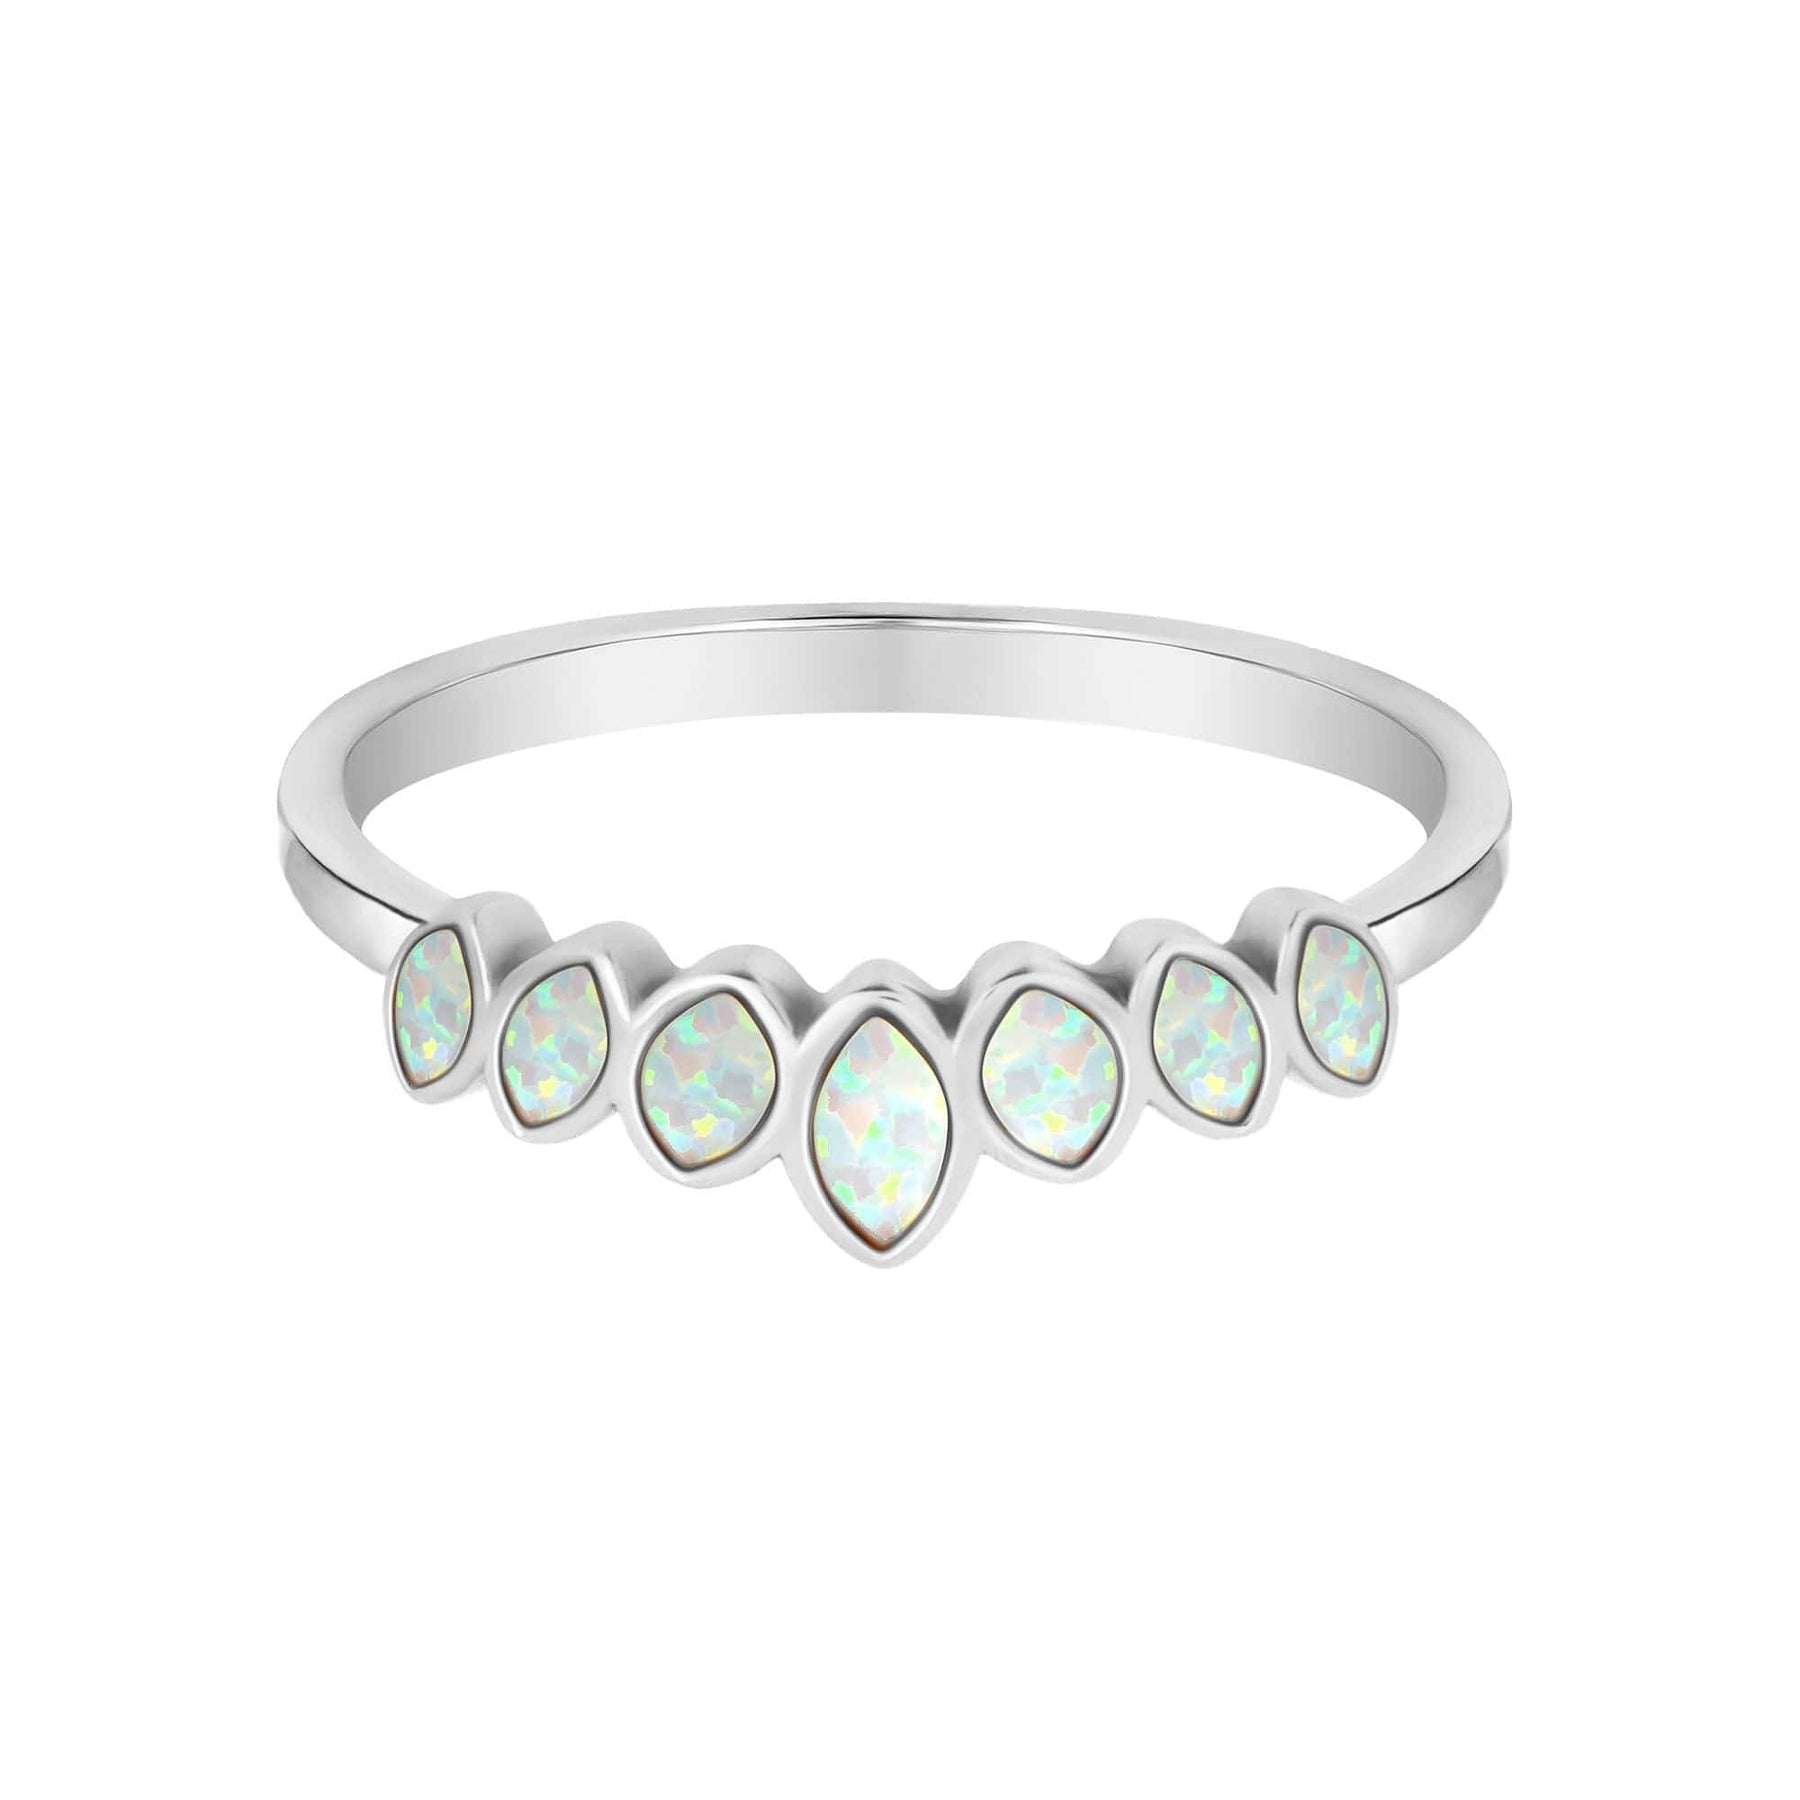 BohoMoon Stainless Steel Catalina Opal Ring Silver / US 6 / UK L / EUR 51 (small)